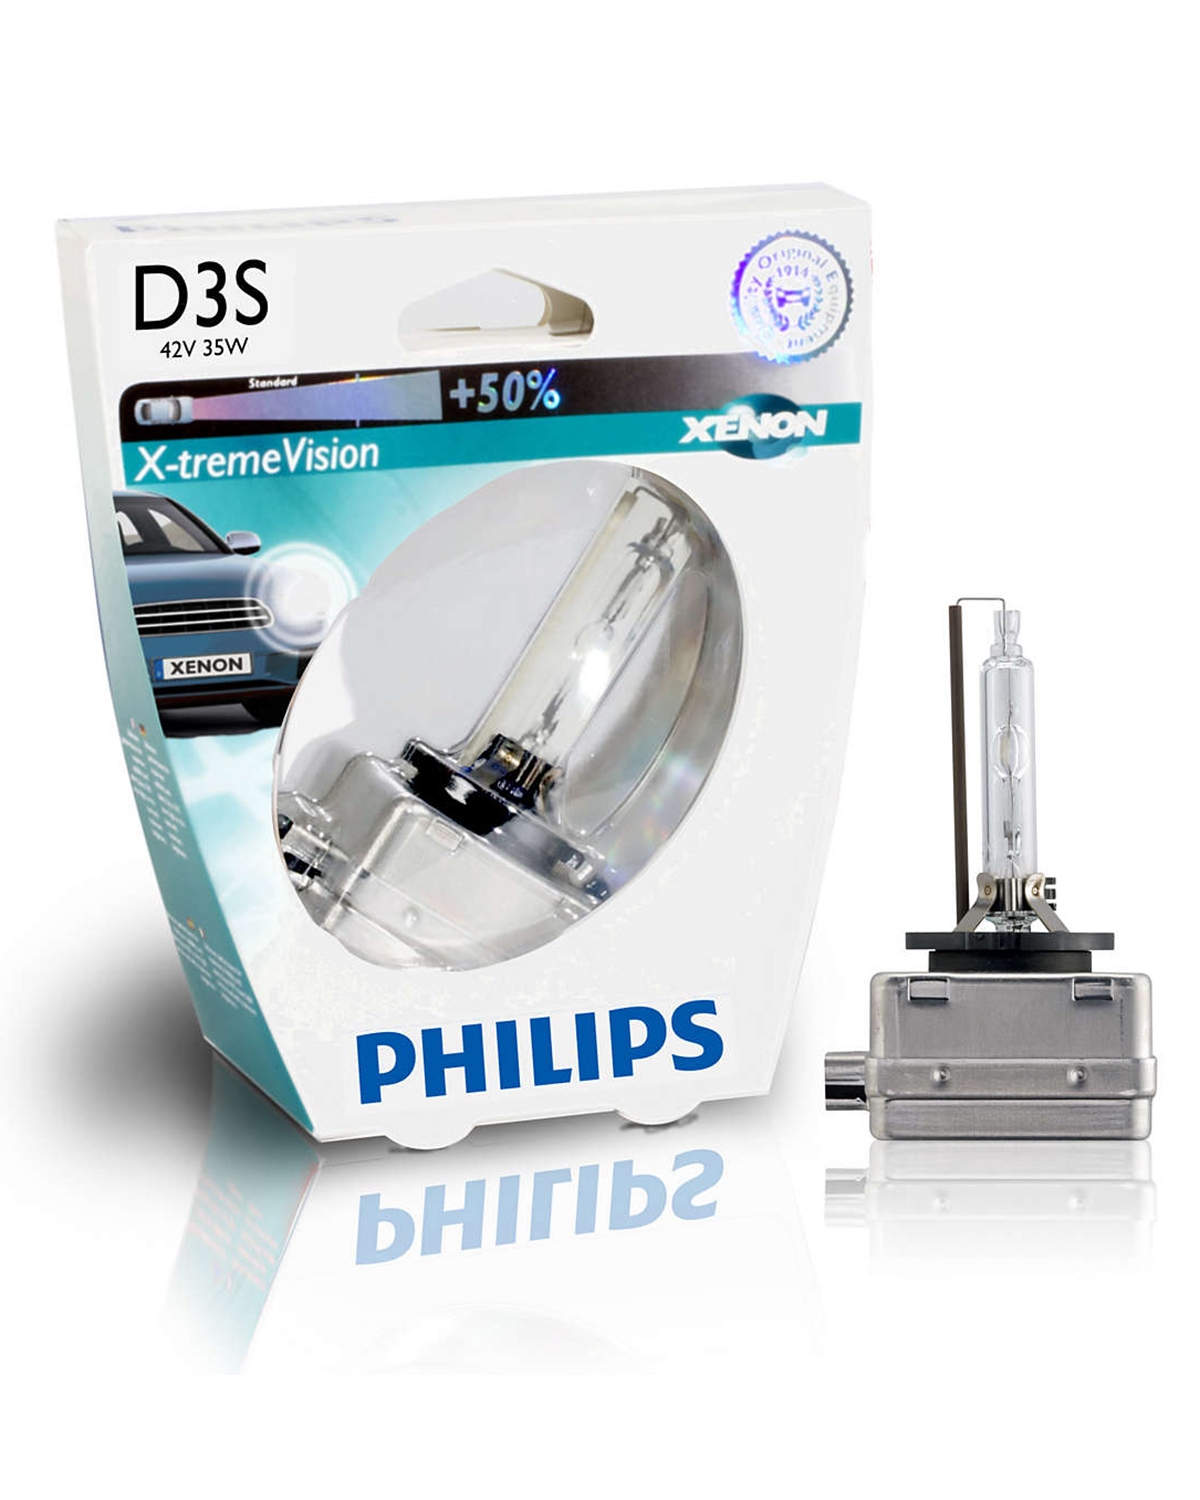 https://www.cardy.fr/images/large/philips-ampoule-xenon-vision-d3s-42v-35w_159588.jpg